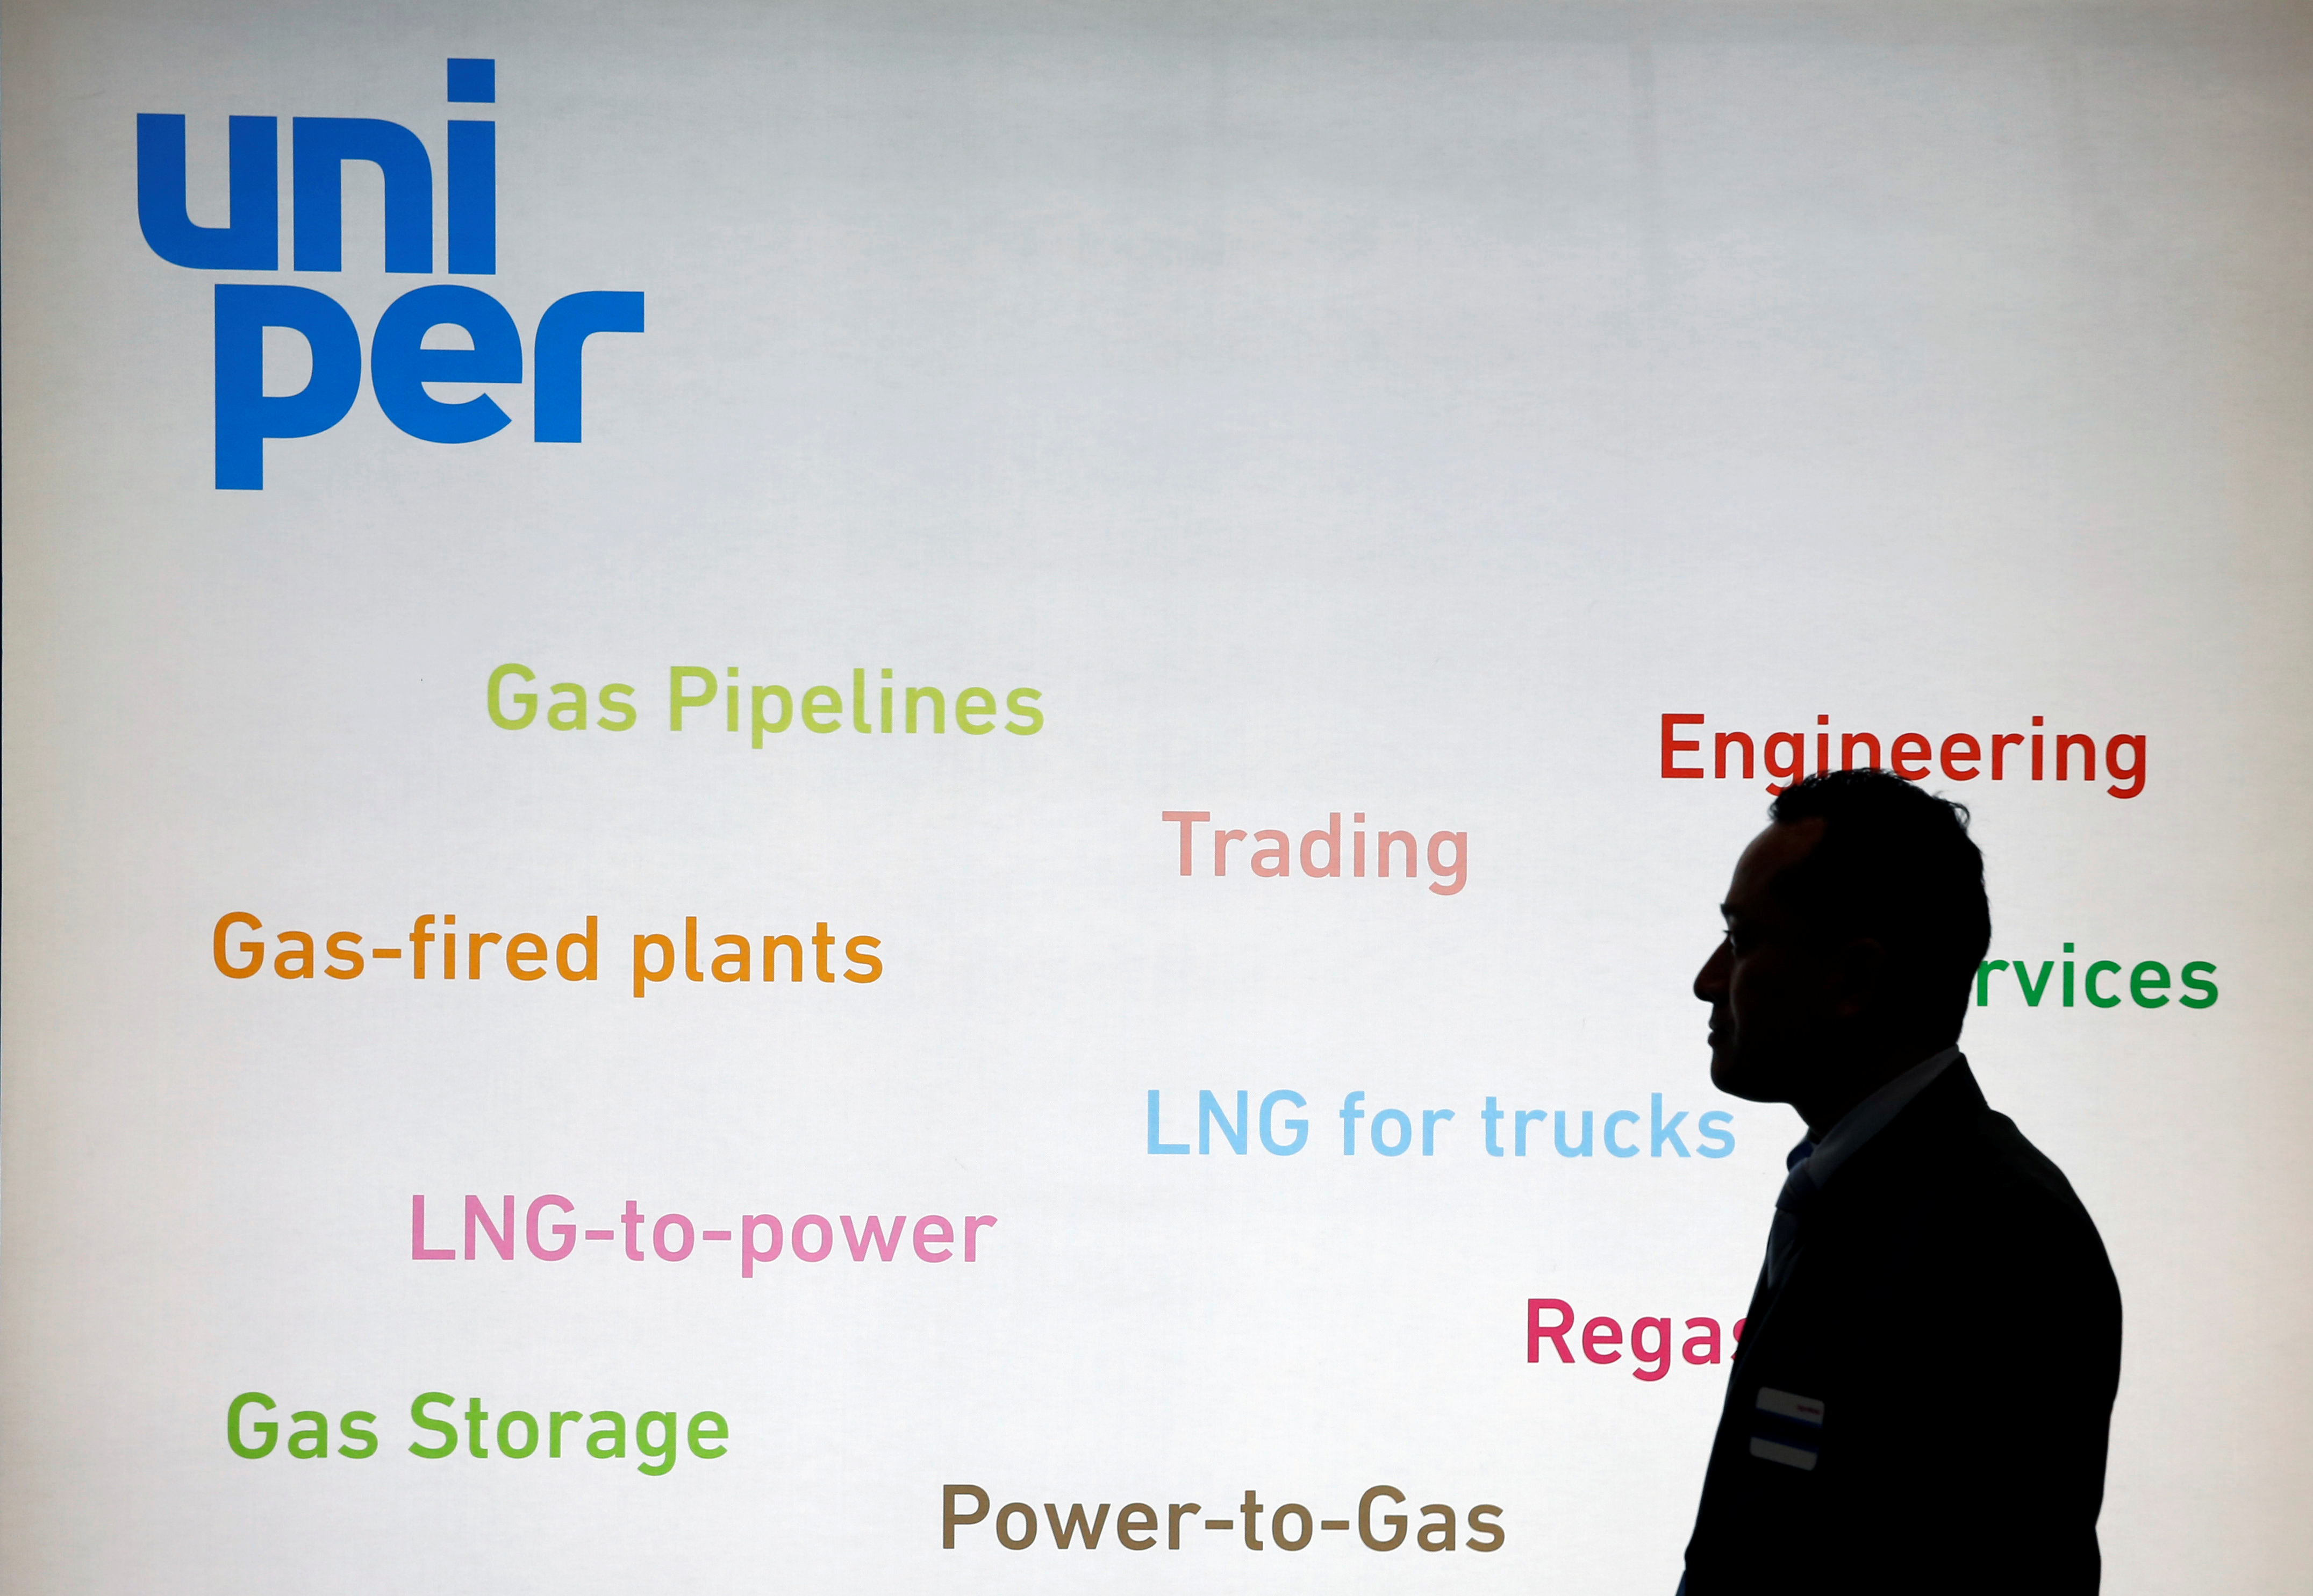 The logo of Uniper SE is seen in its booth at Gastech, the world's biggest expo for the gas industry, in Chiba